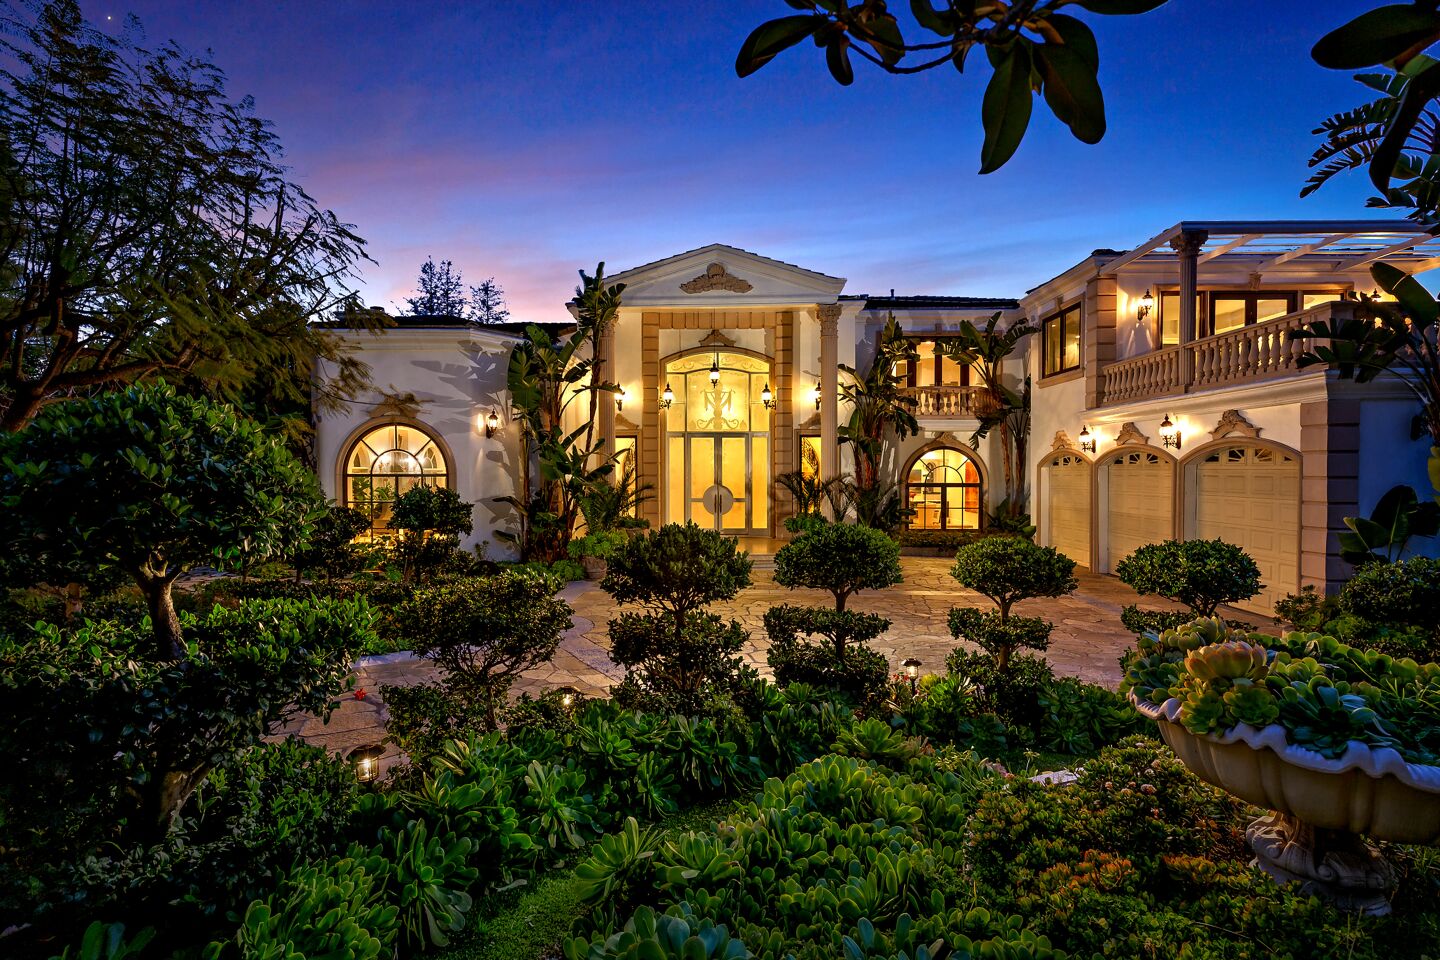 Hungarian curlers György Nagy and Ildikó Szekeres paid $6.1 million for this Mediterranean-style mansion in Bel-Air.